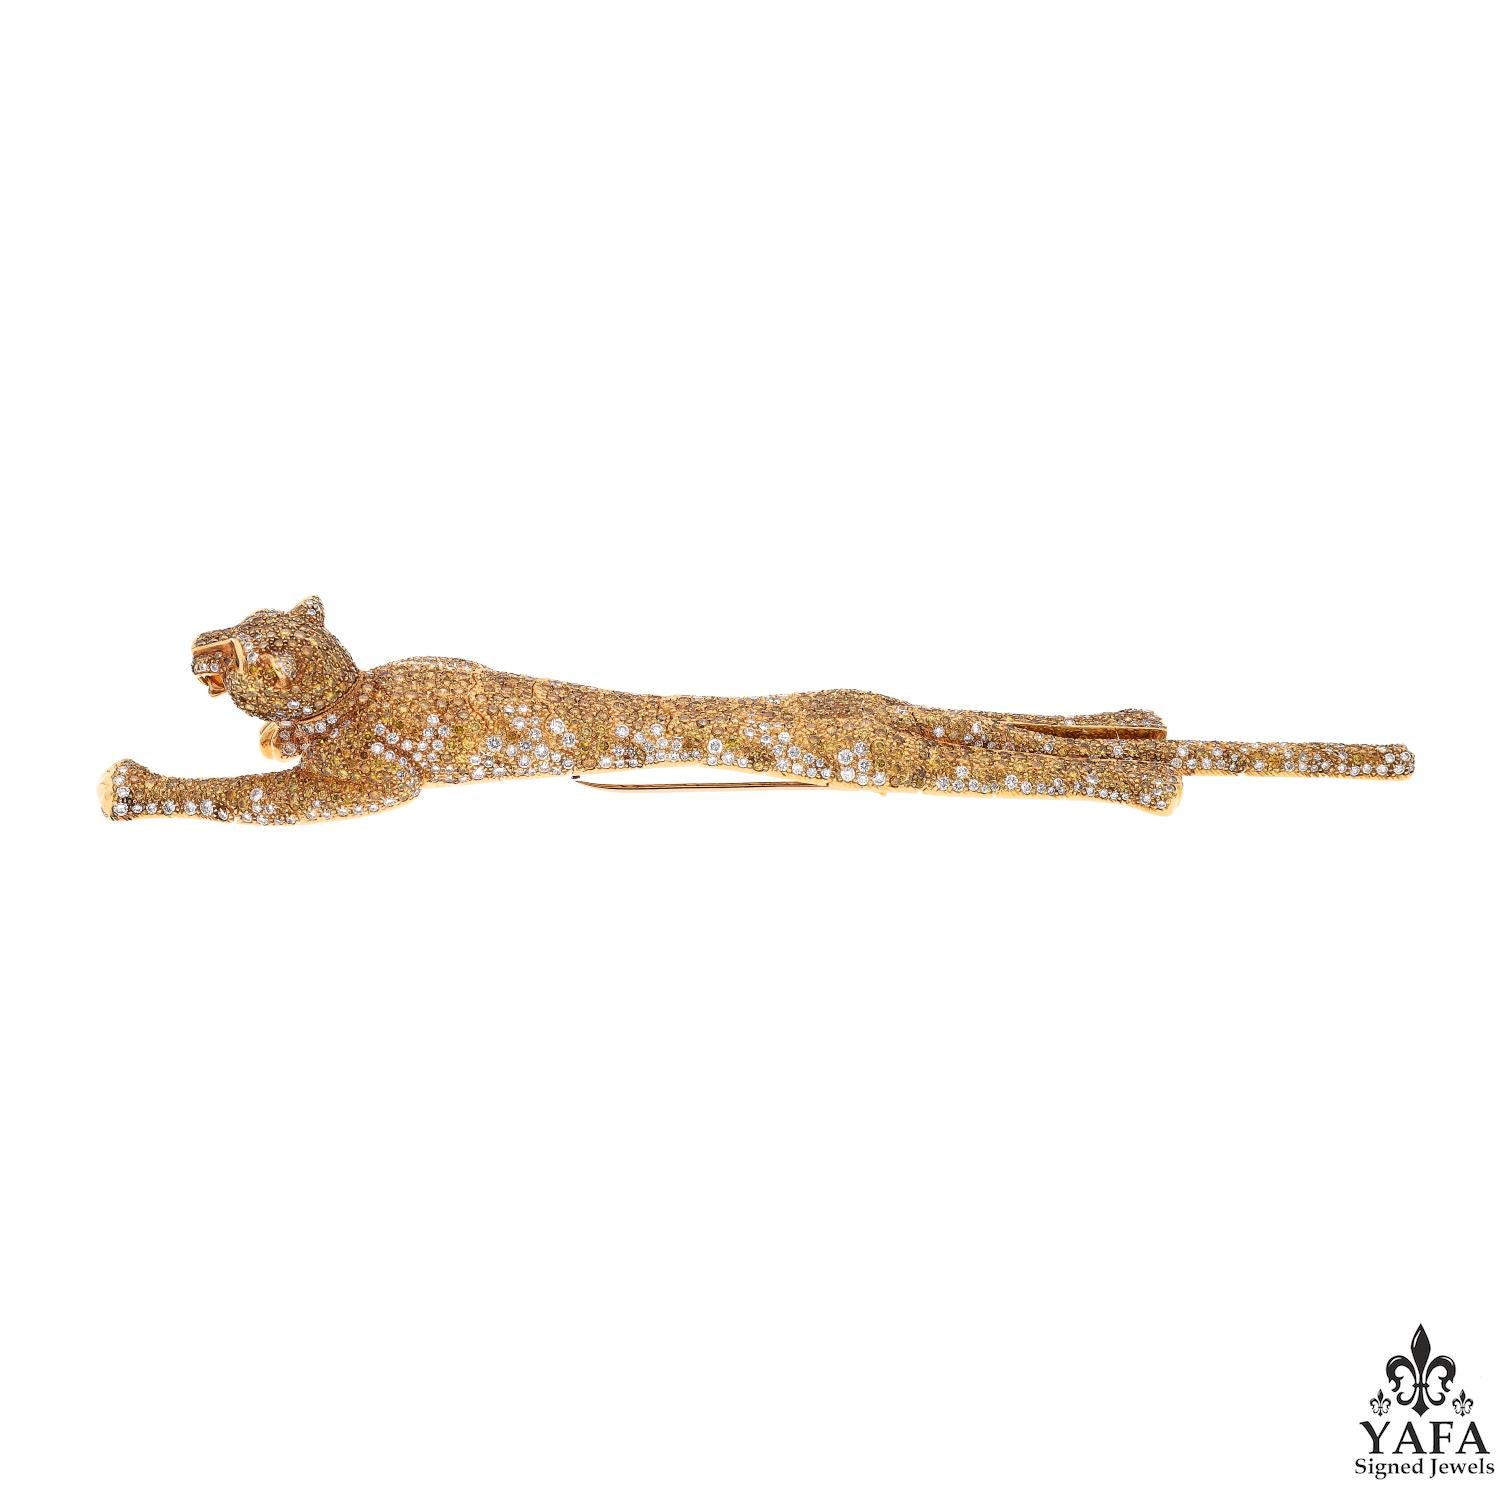 Cartier Paris Yellow Cognac White Diamond Panther Brooch

Cartier describes the Panther as 'The Panther is Cartier’s iconic animal: a wild, untamable animal whose symbolism and elegance have reigned over Maison's creativity since its first